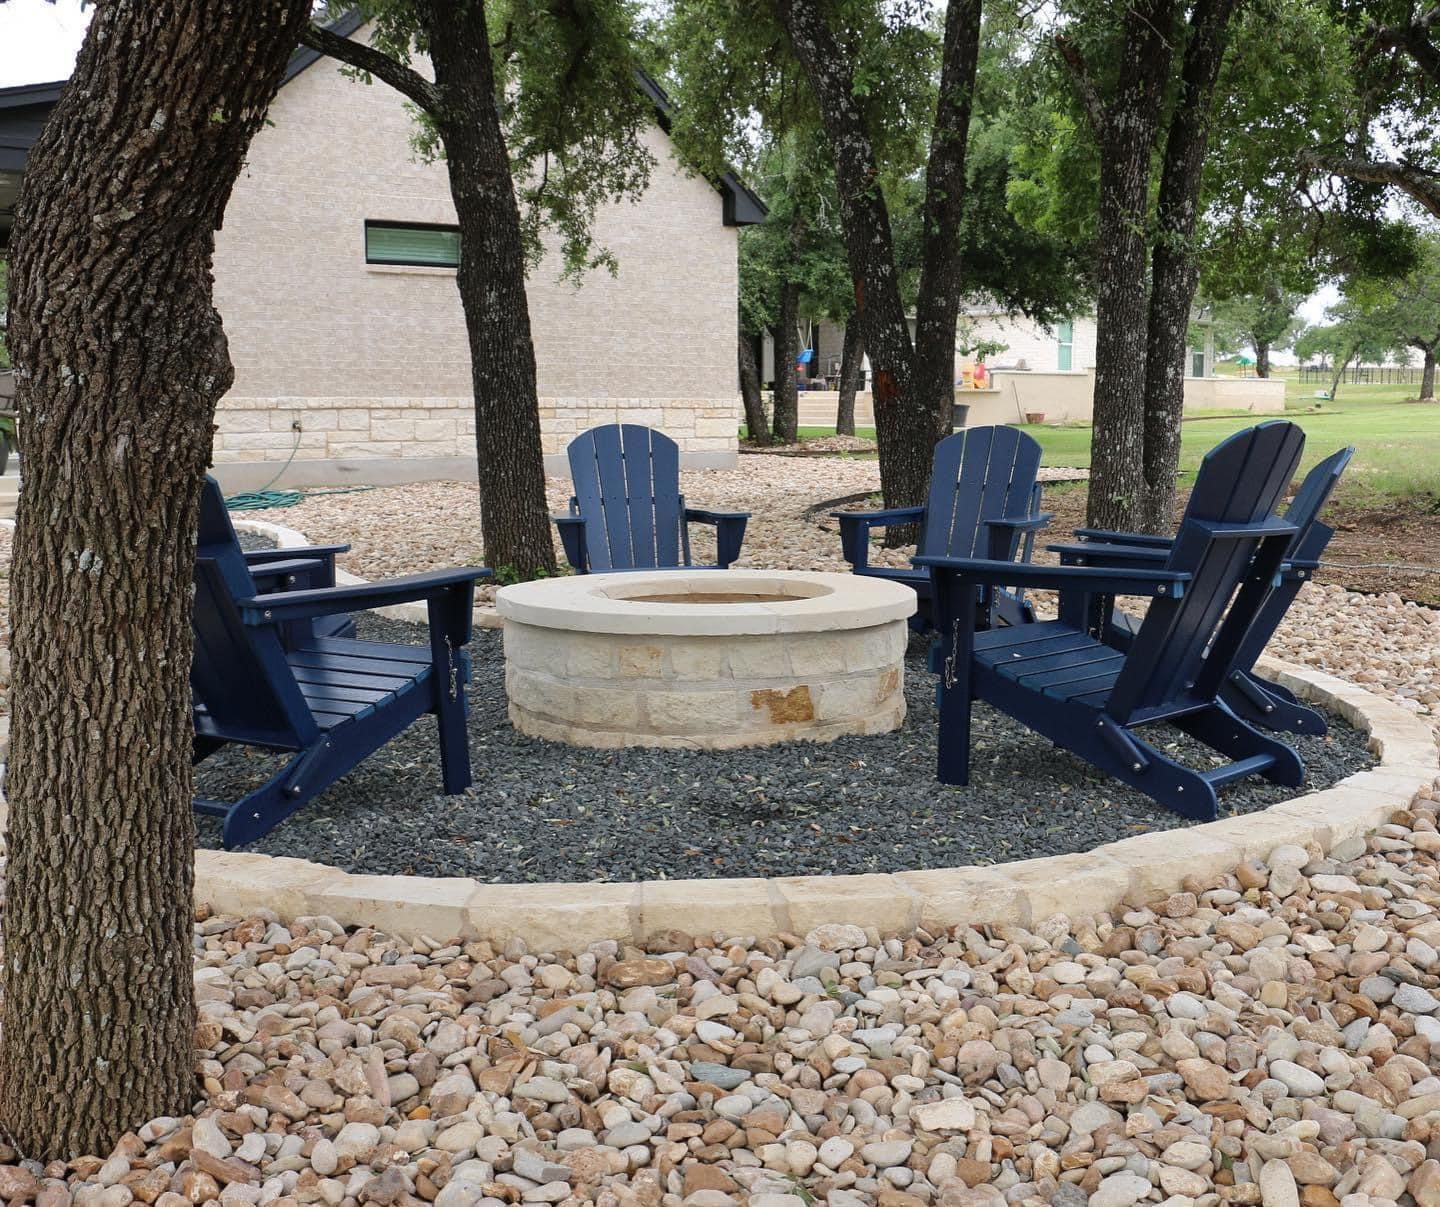 Landscaping fire pit with gravel and river rock and limestone borders.  Sitting area landscaping